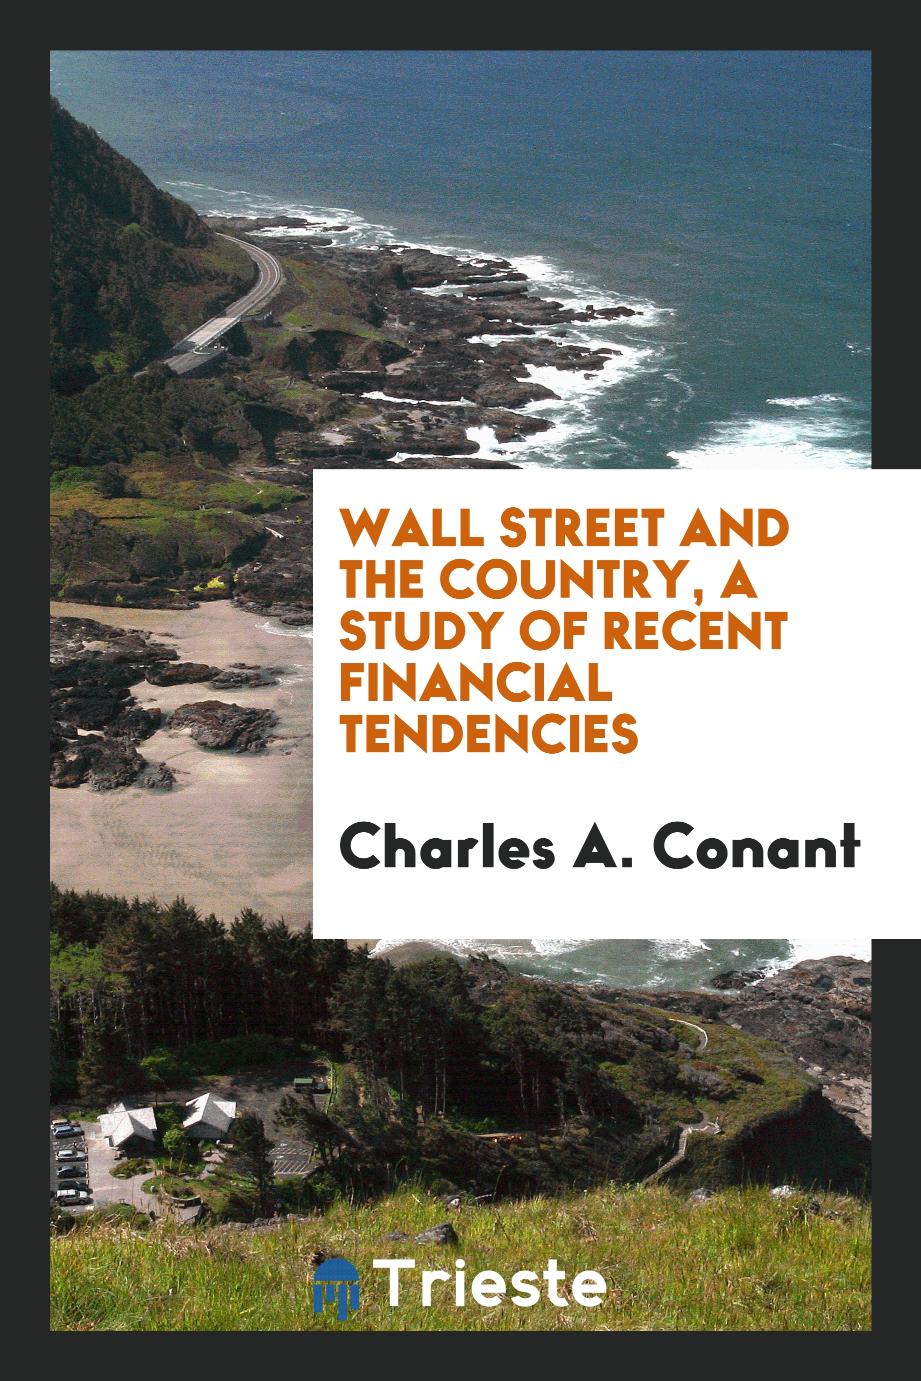 Wall street and the country, a study of recent financial tendencies